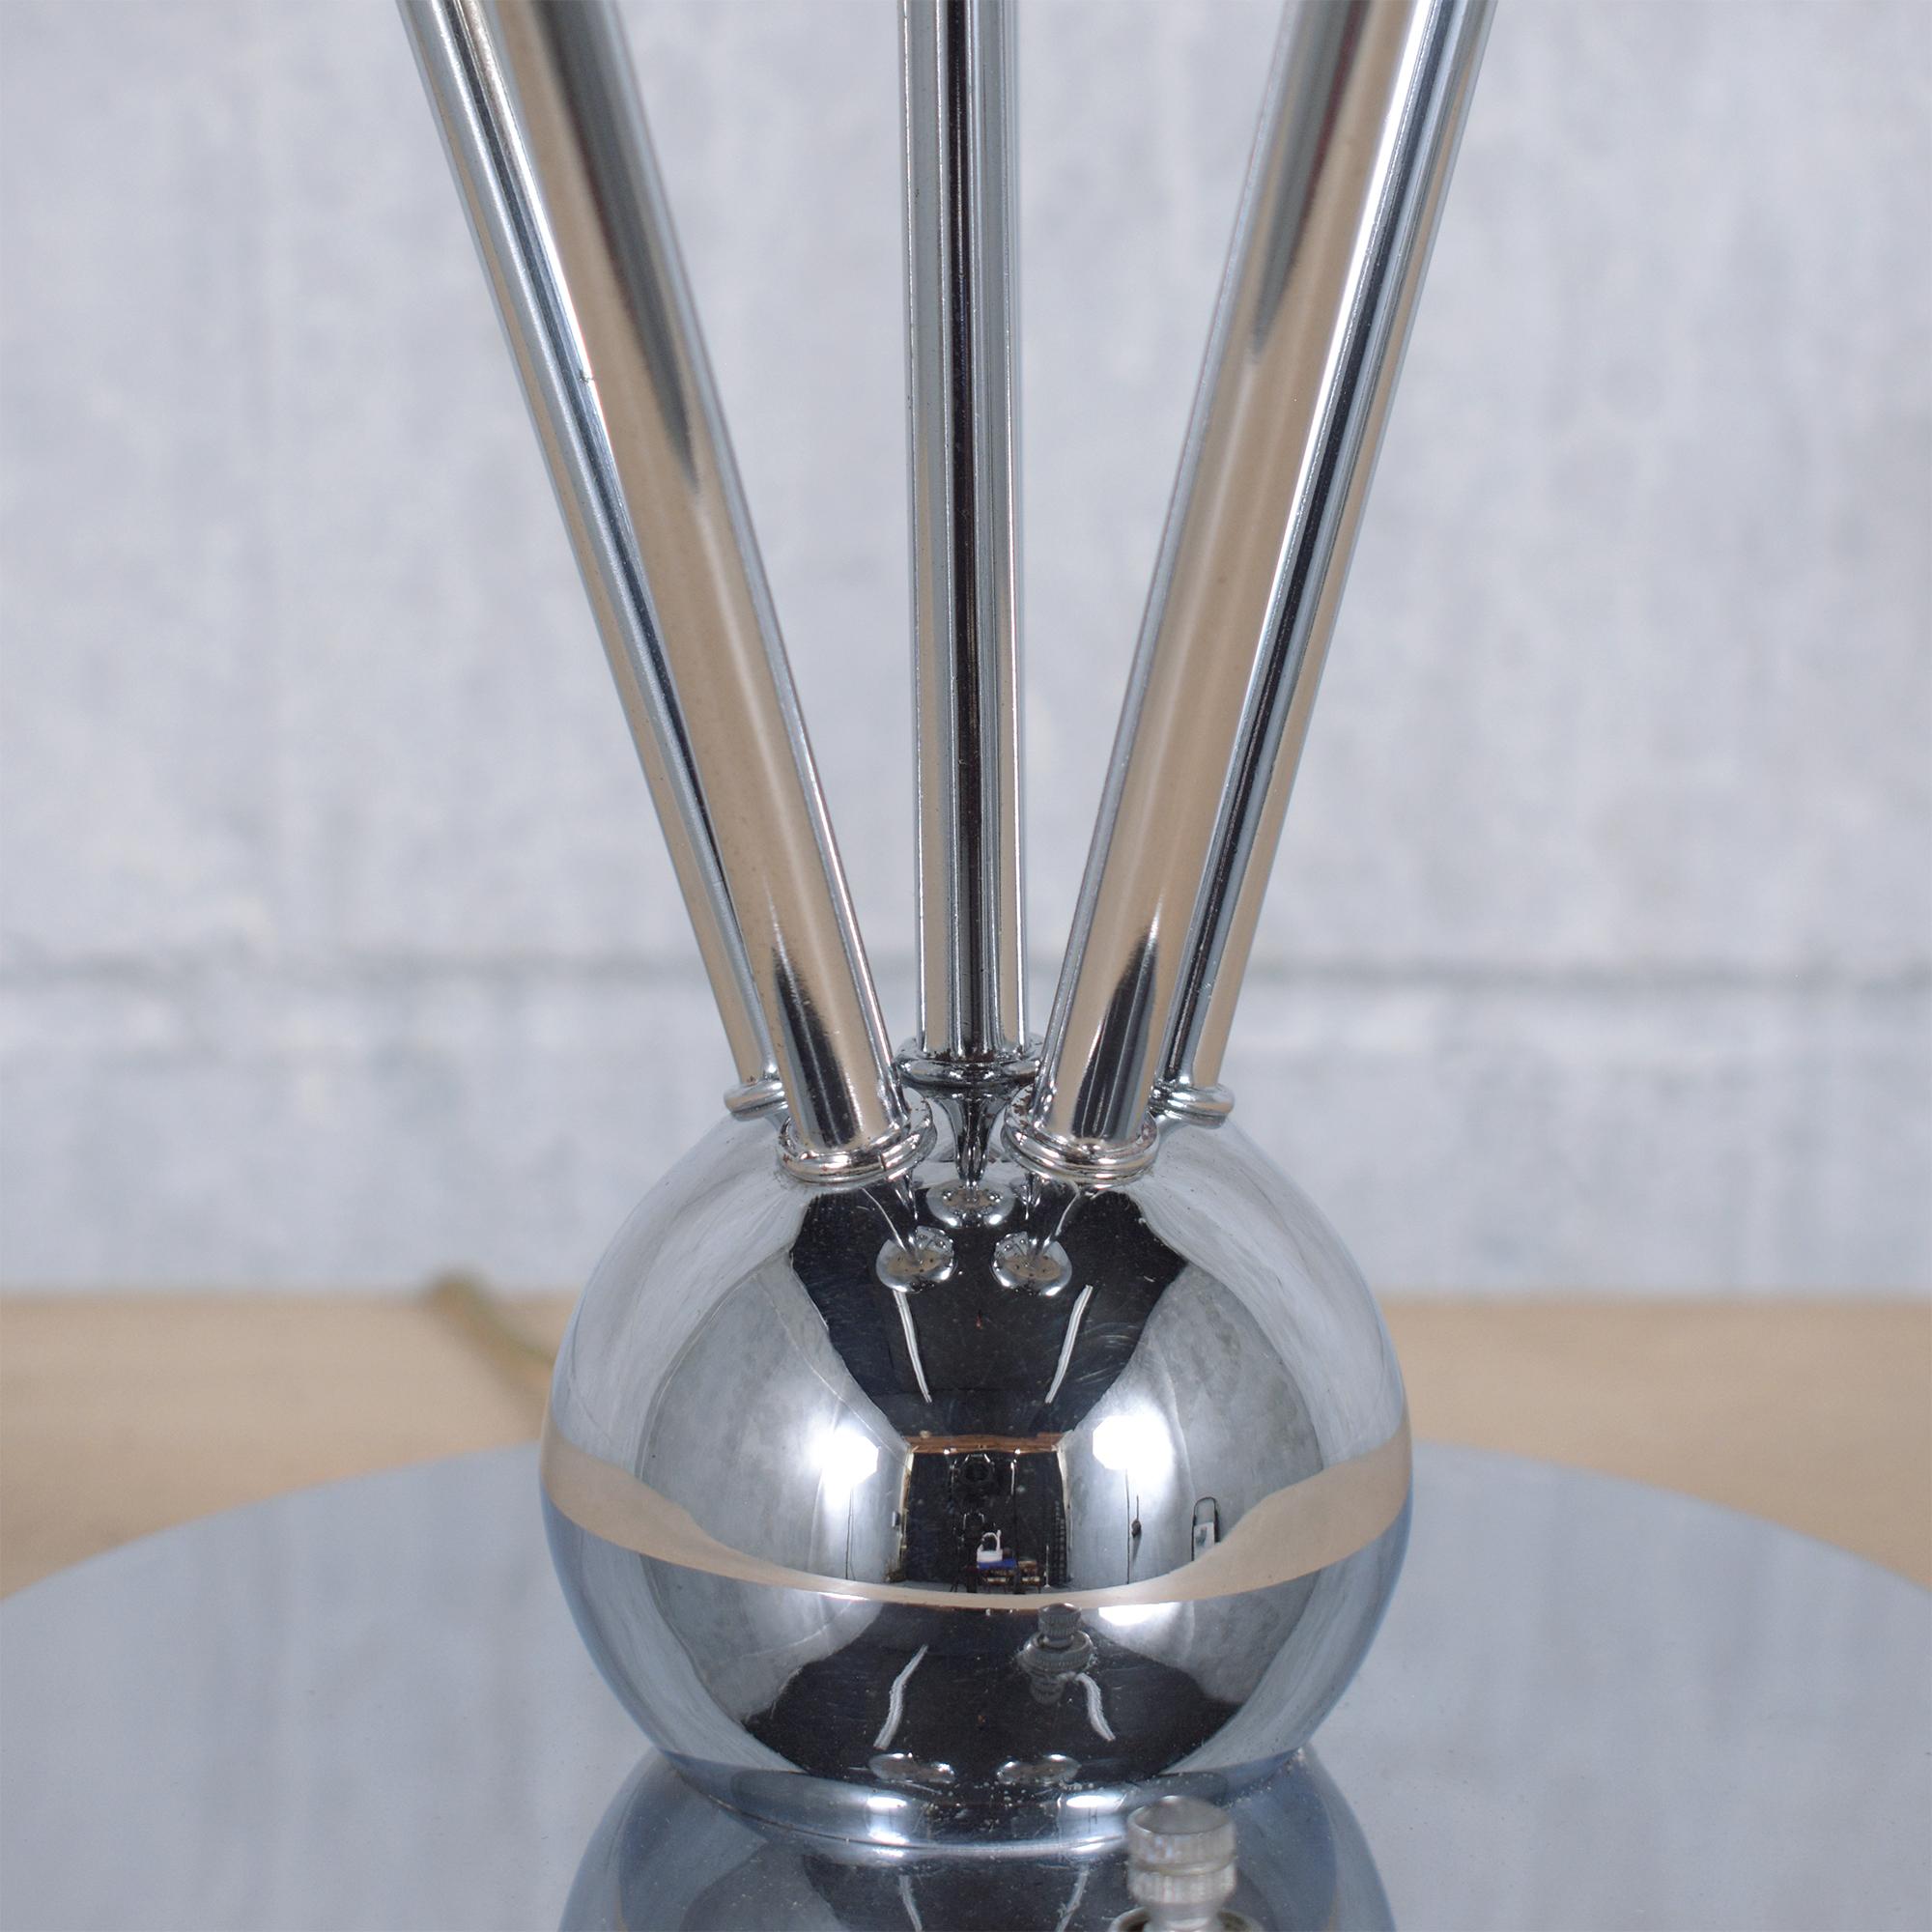 1960s Mid-Century Modern Table Lamp: Space-Age Design Masterpiece For Sale 3